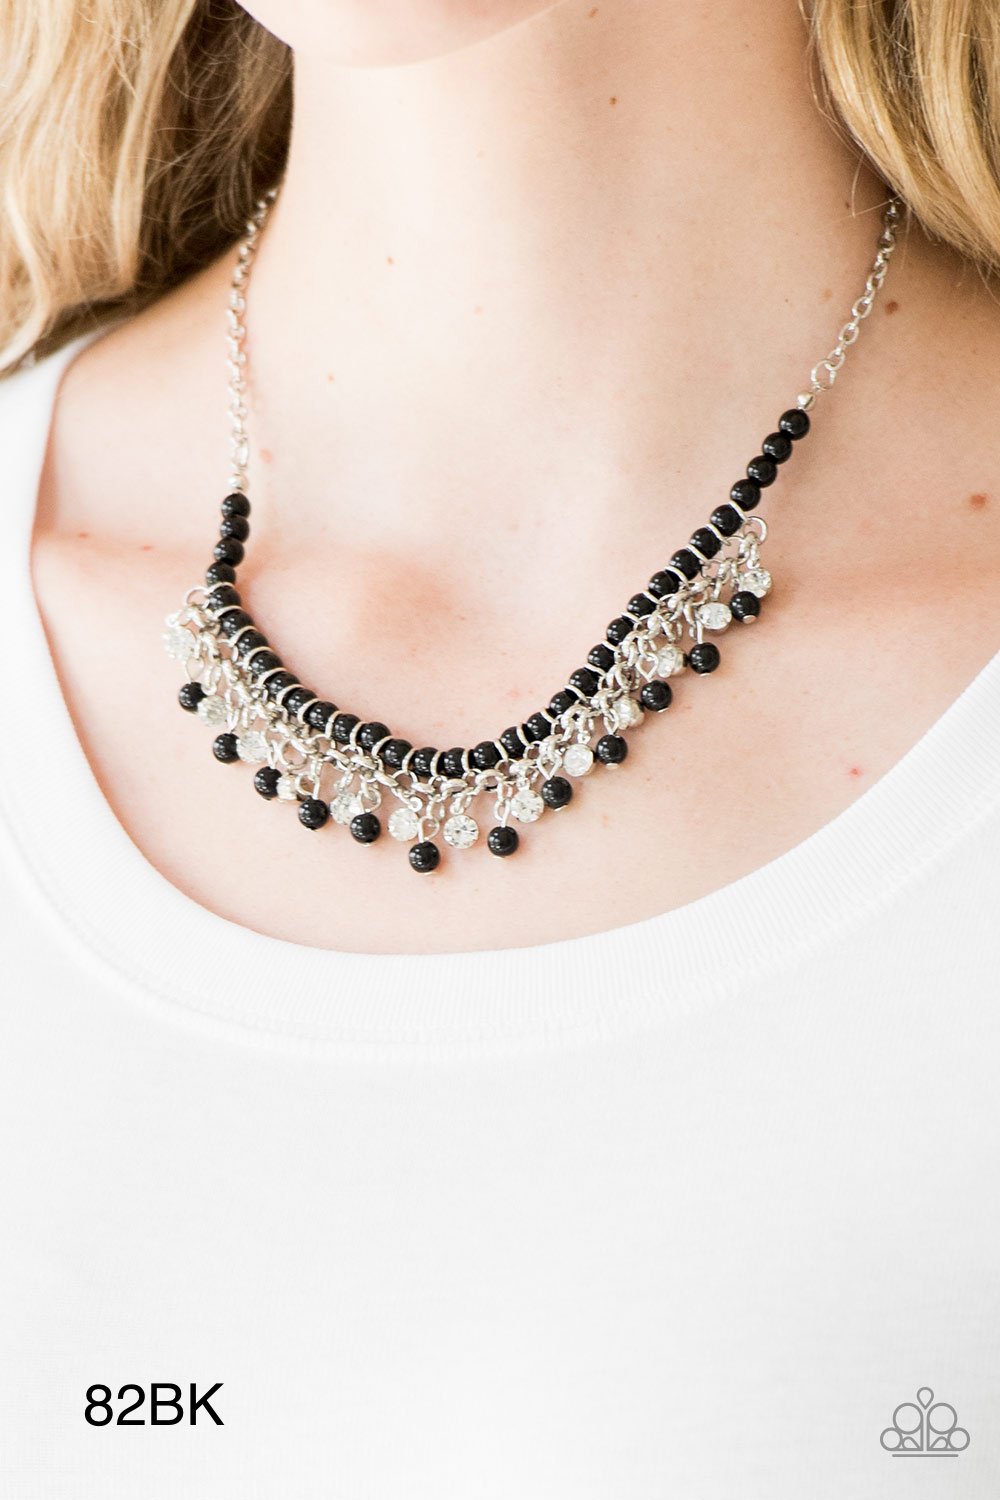 Paparazzi “A Touch of CLASSY” Black - Necklace Earring Set